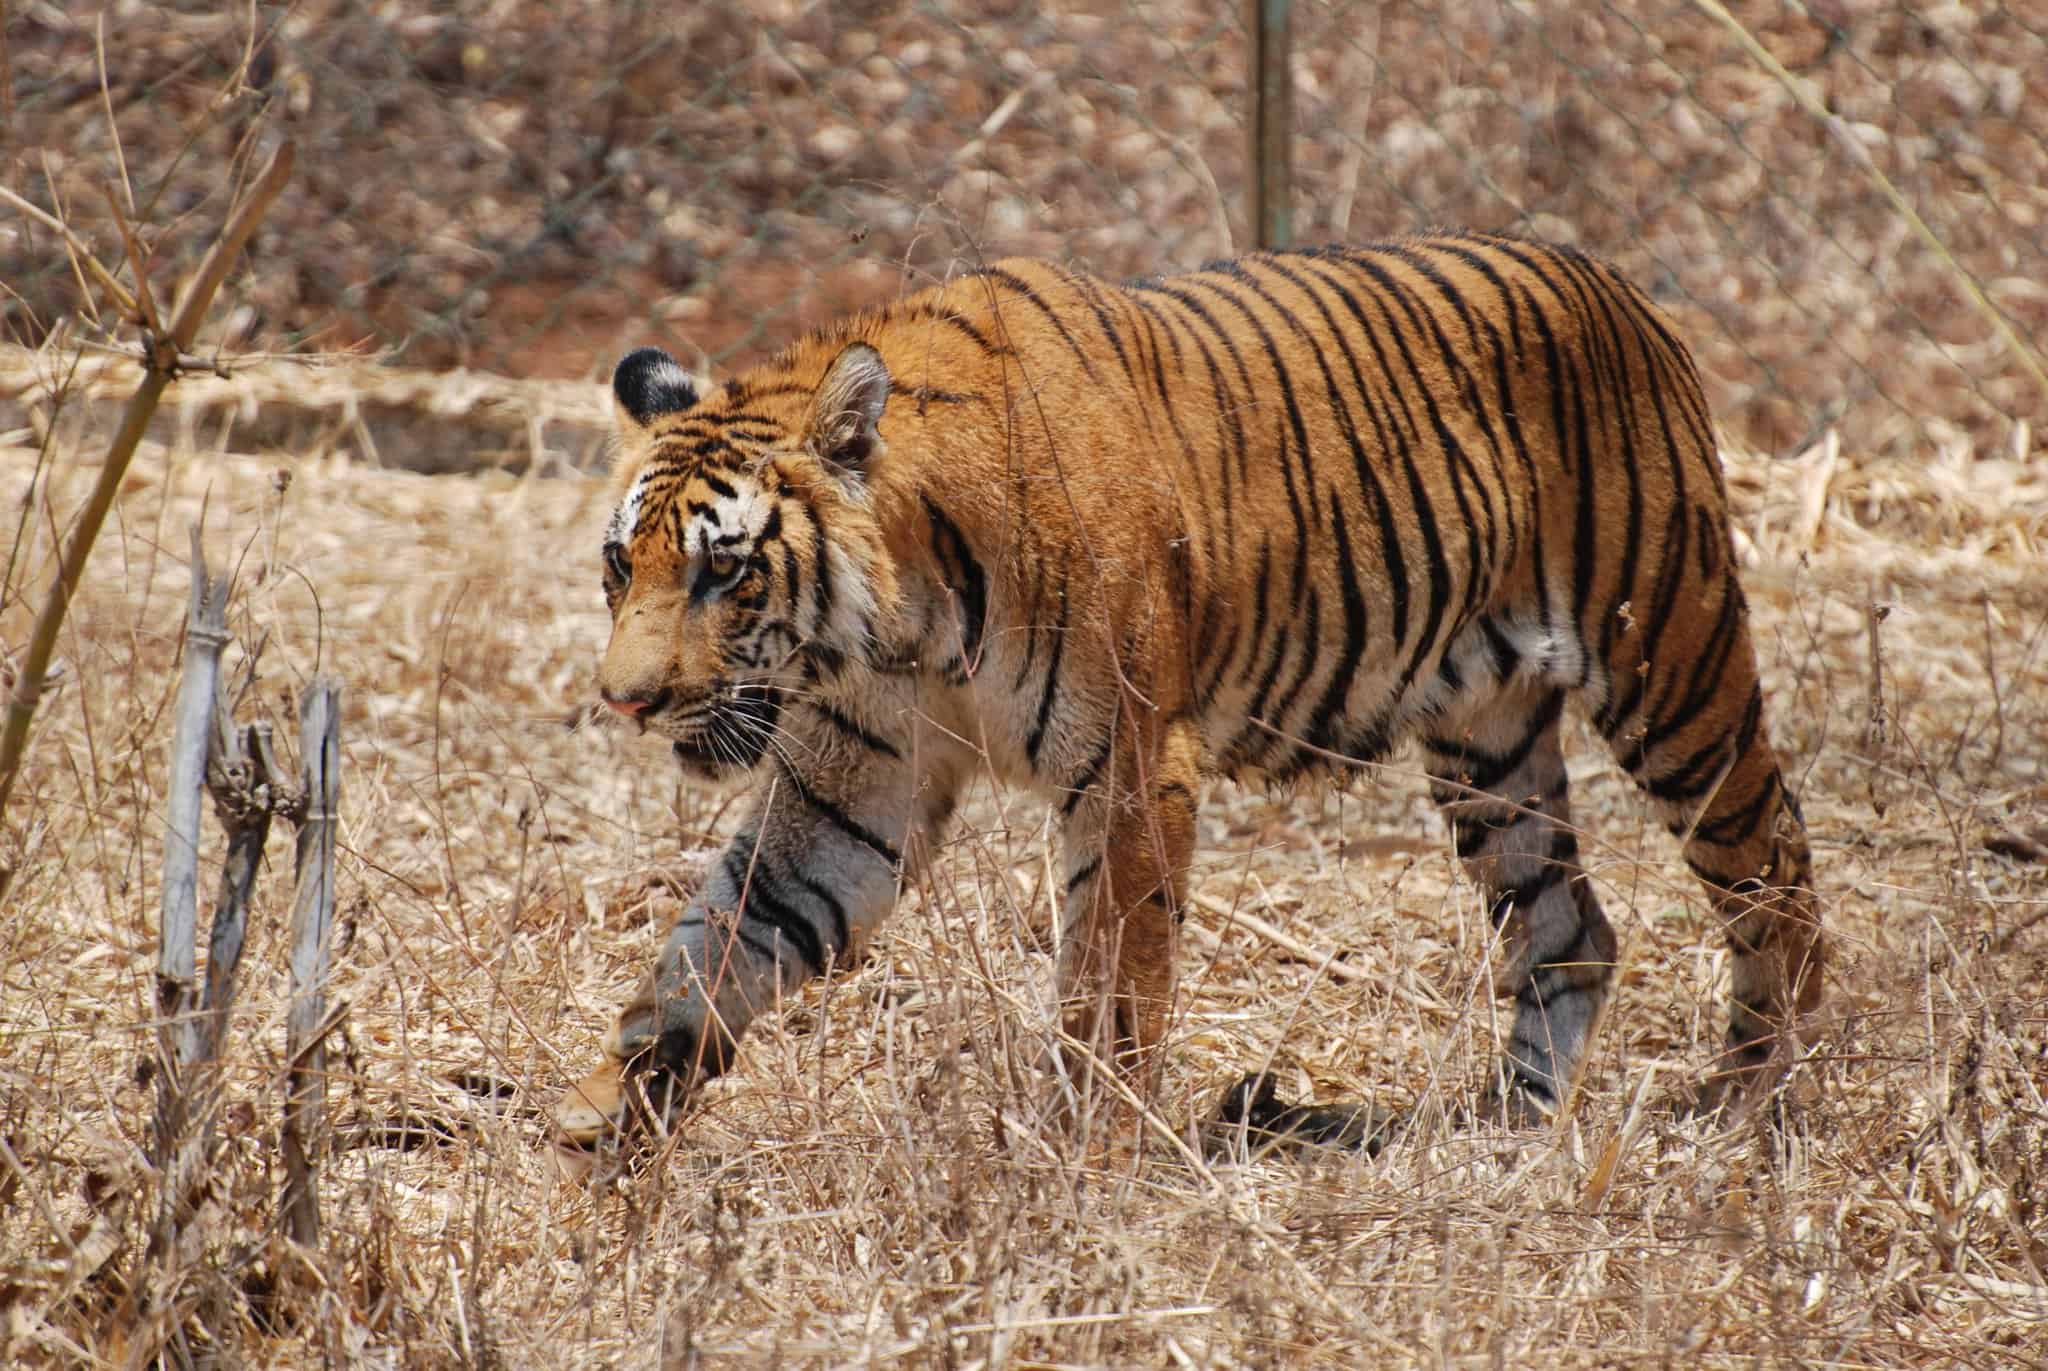 8 Key distinctions between Royal Bengal Tiger and Asiatic Lion